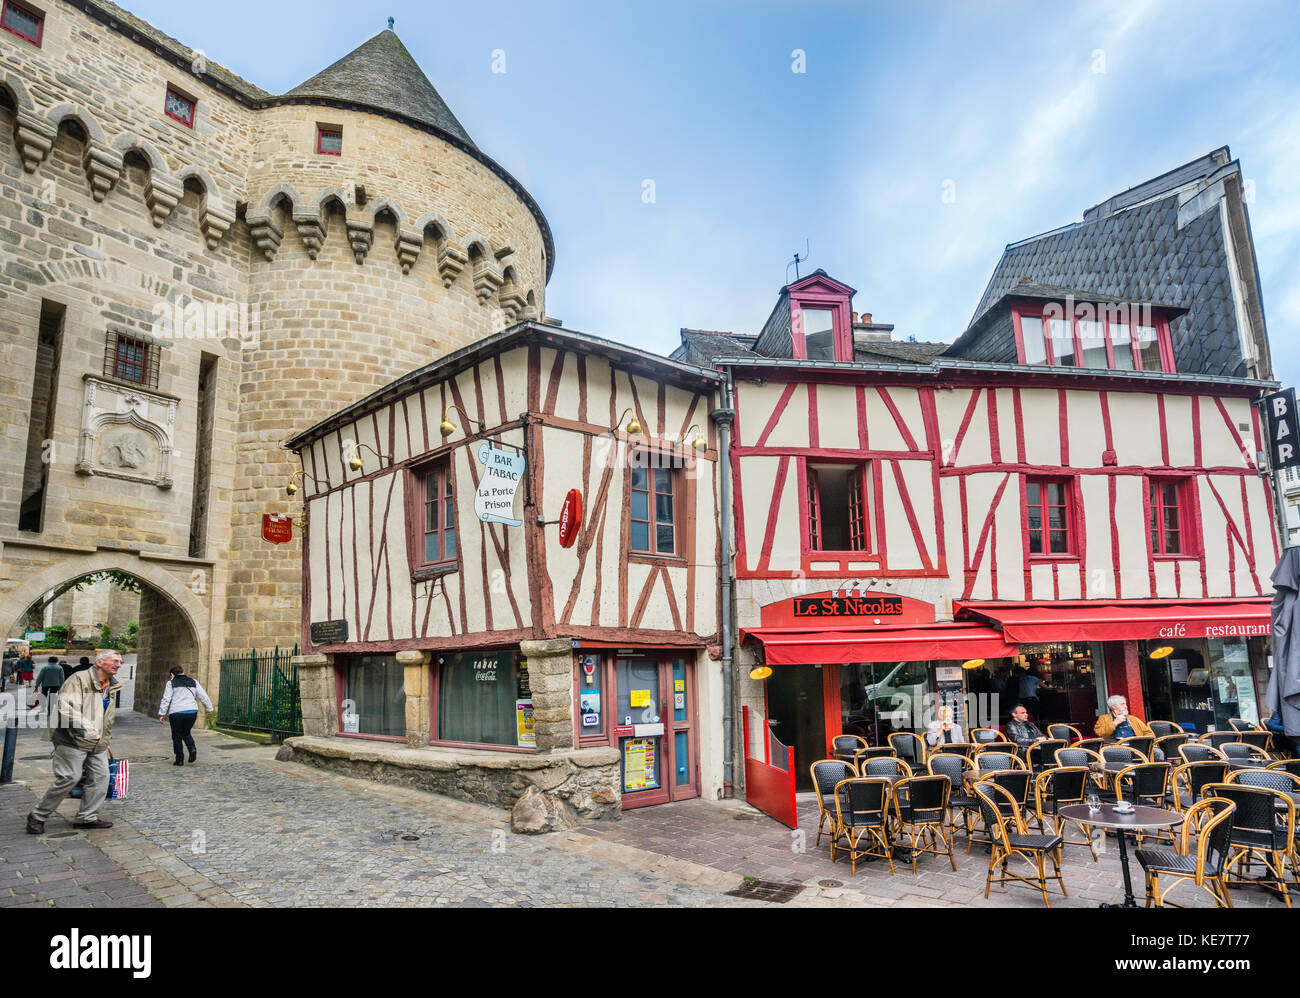 France, Brittany, Morbihan, Vannes, Prison Gate (Porte de Prison), a medieval city gate of the walled city flanked by ancient timber-framed houses Stock Photo